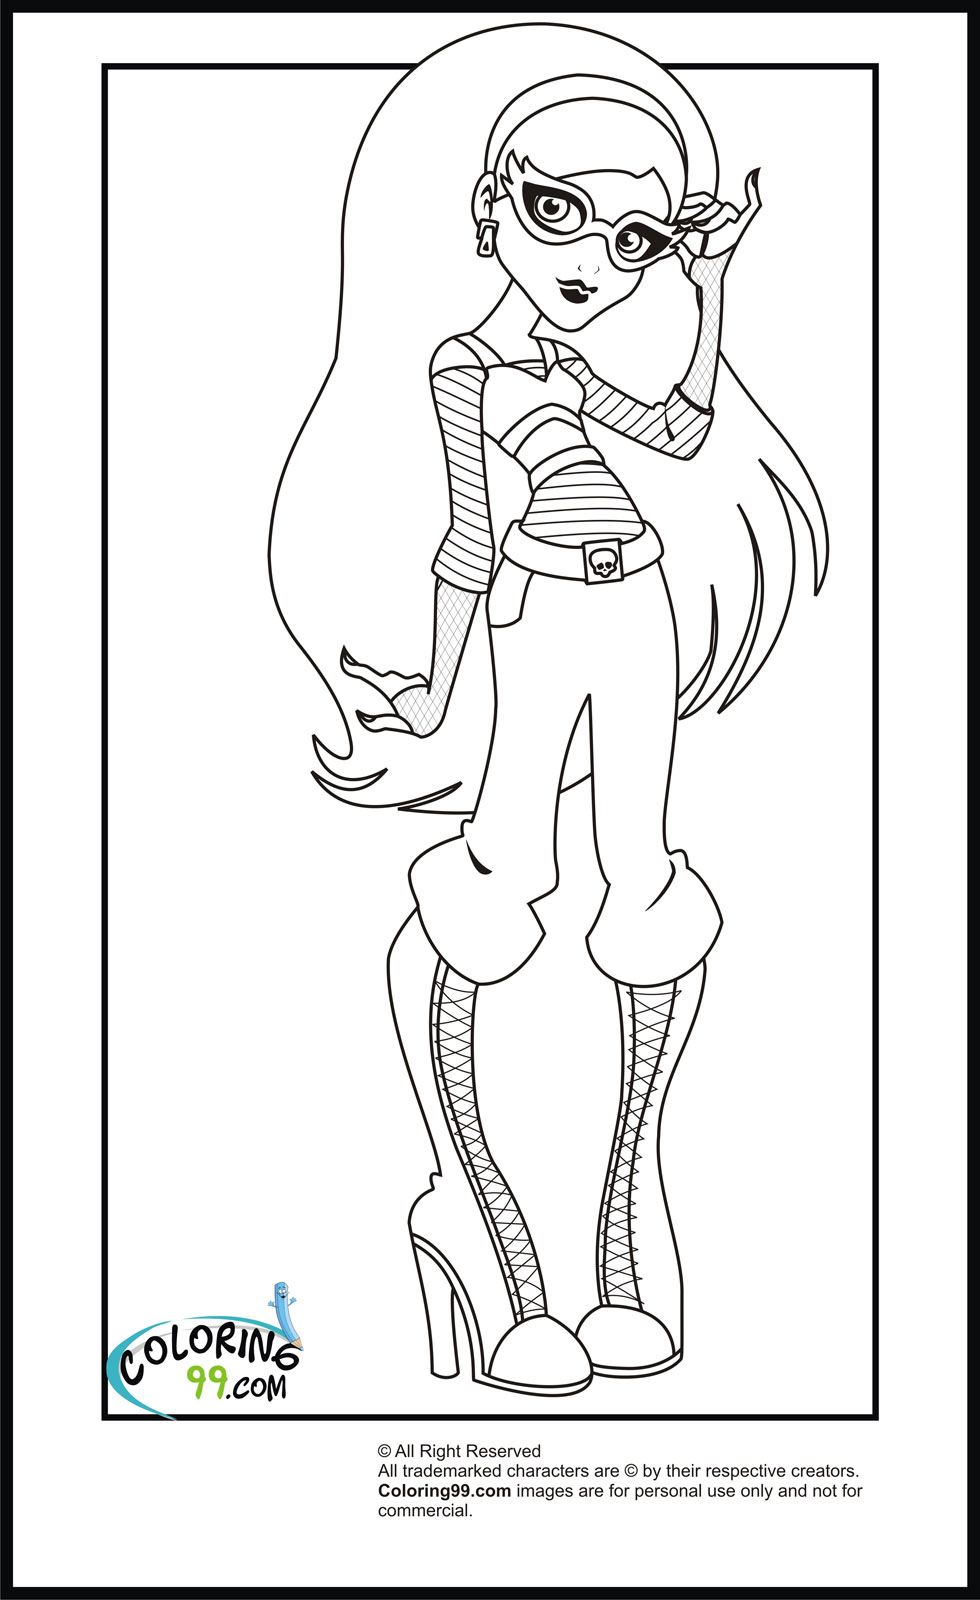 Monster High Coloring Pages | Coloring pages for Girls | Cool coloring page | #6